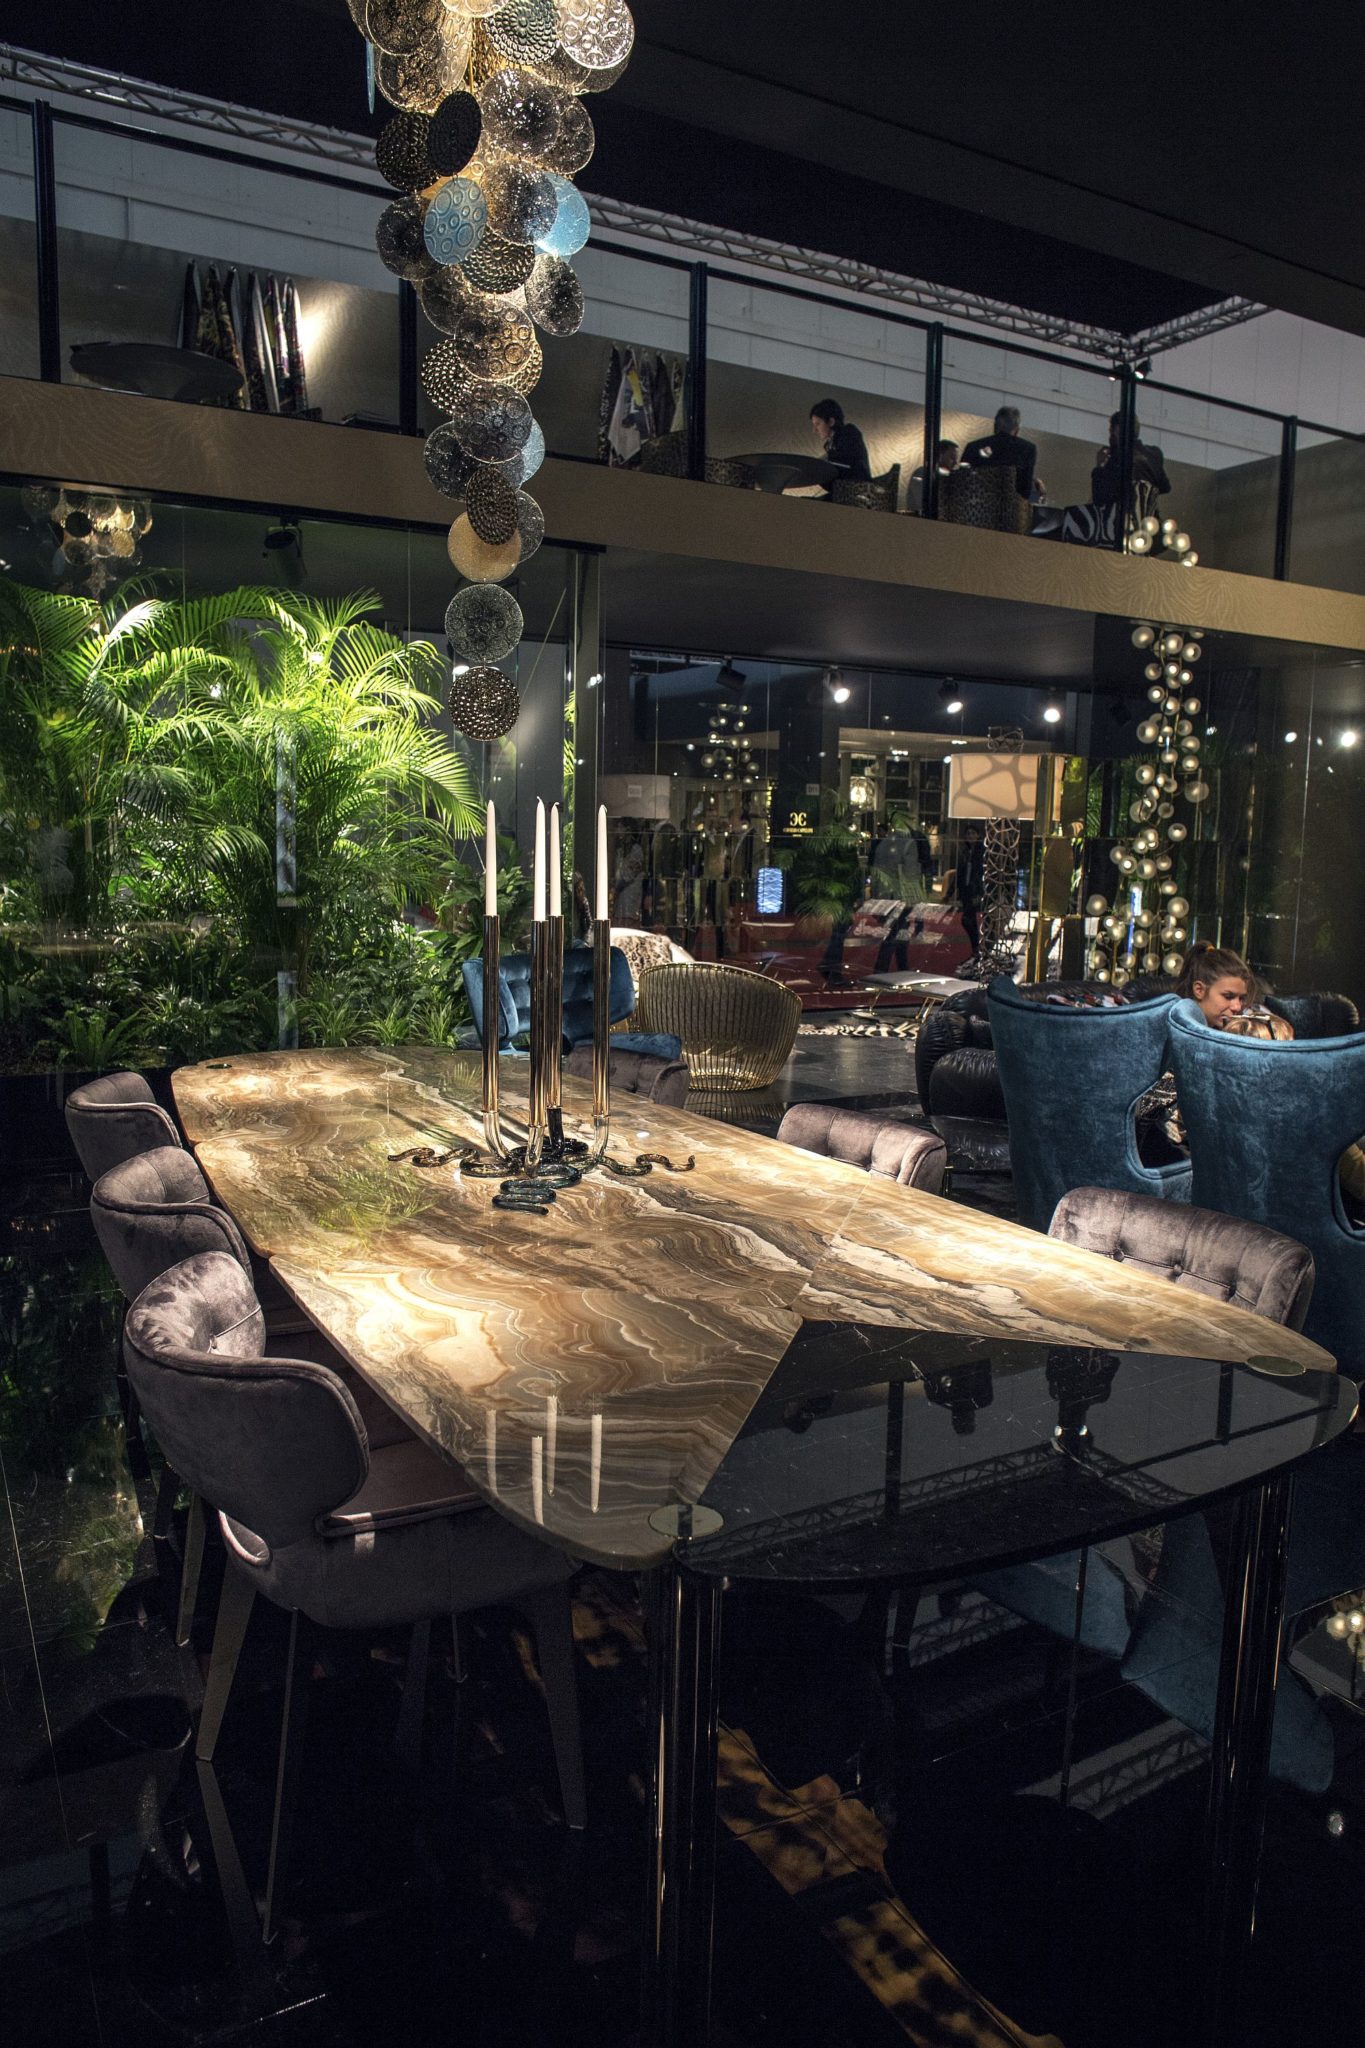 Luxury-classic-furniture-for-the-dining-room-from-Roberto-Cavalli